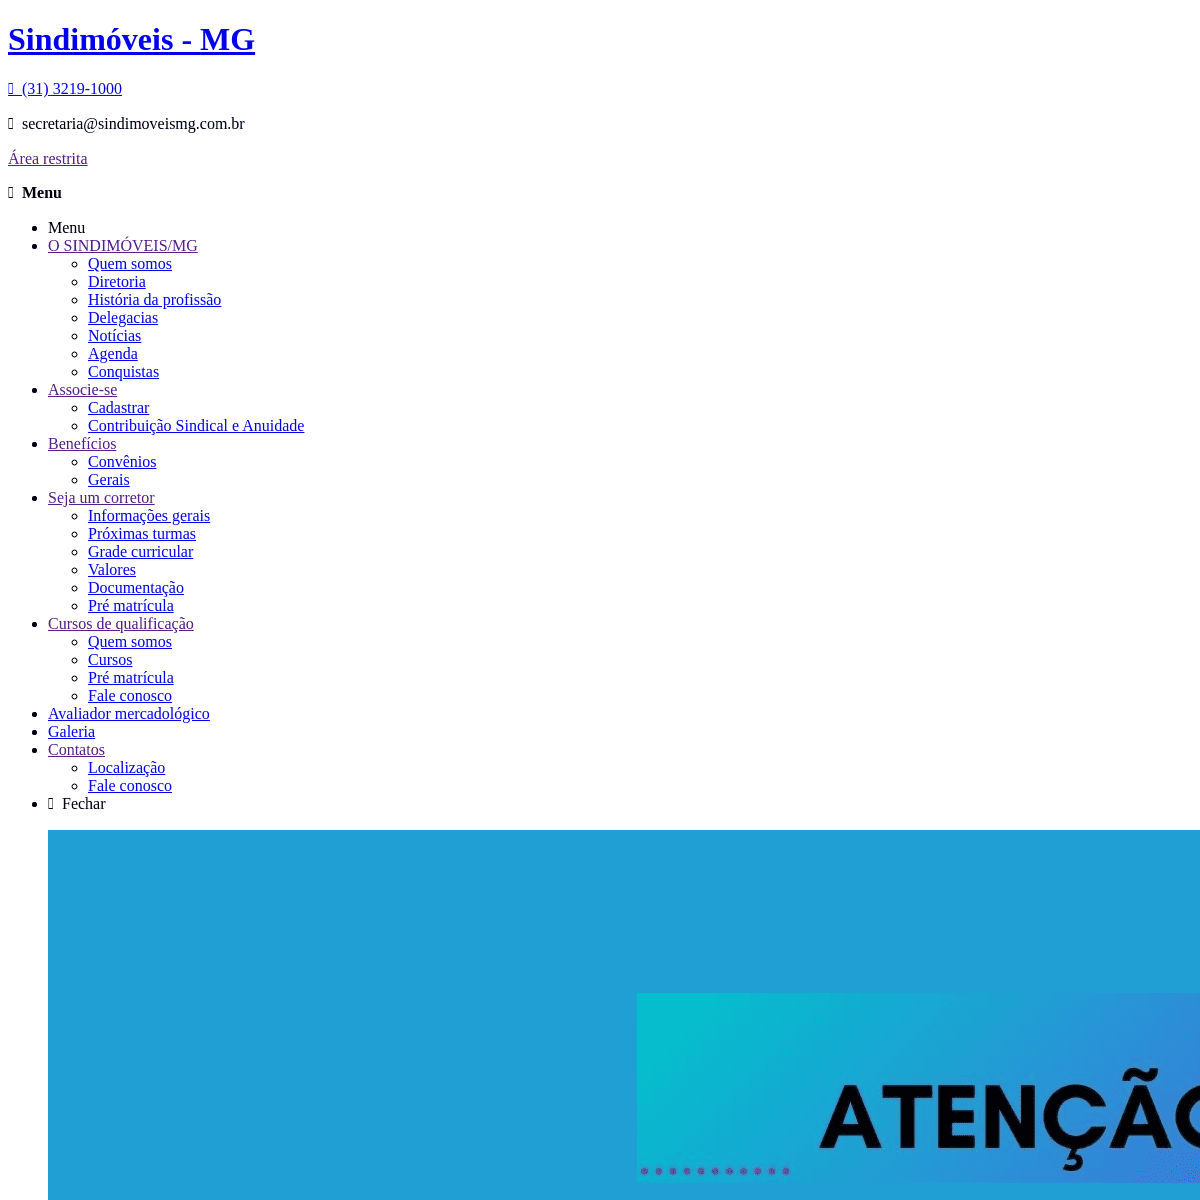 A complete backup of sindimoveismg.com.br